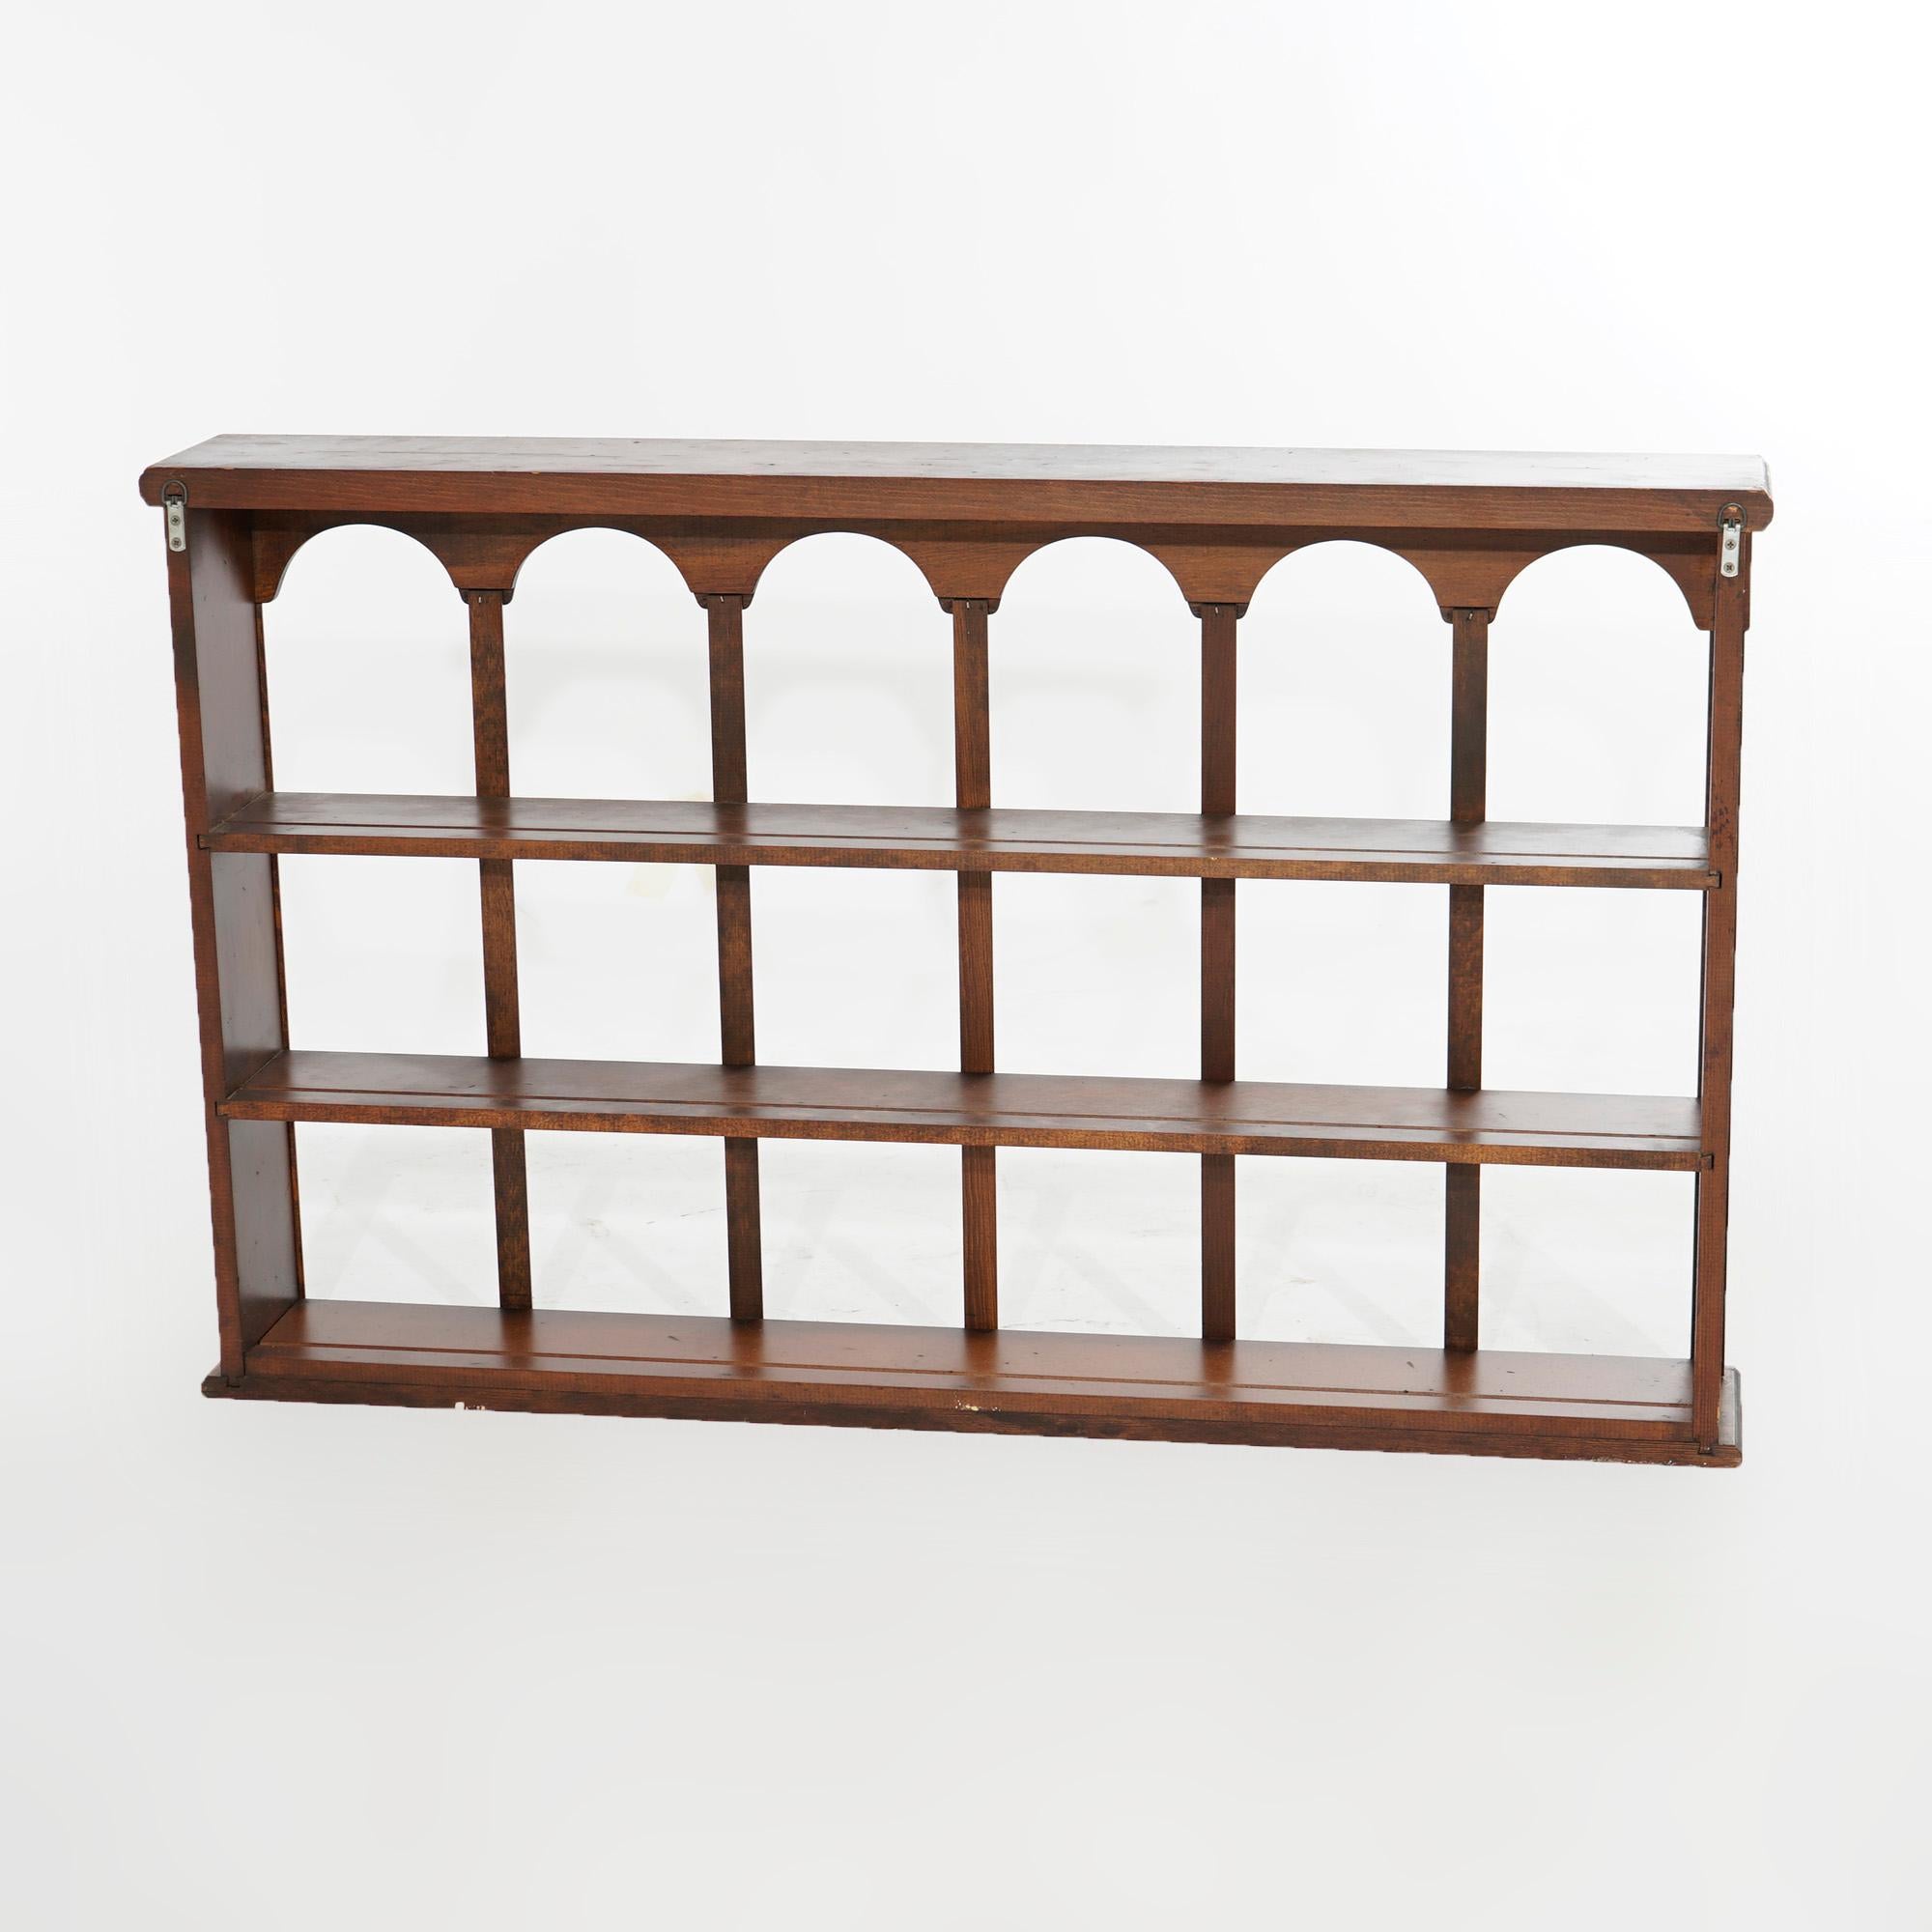 A hanging curio display wall shelf offers mahogany construction with three shelves and arched upper compartments, 20th century

Measures- 24.5''H x 39.5''W x 6''D.

Catalogue Note: Ask about DISCOUNTED DELIVERY RATES available to most regions within